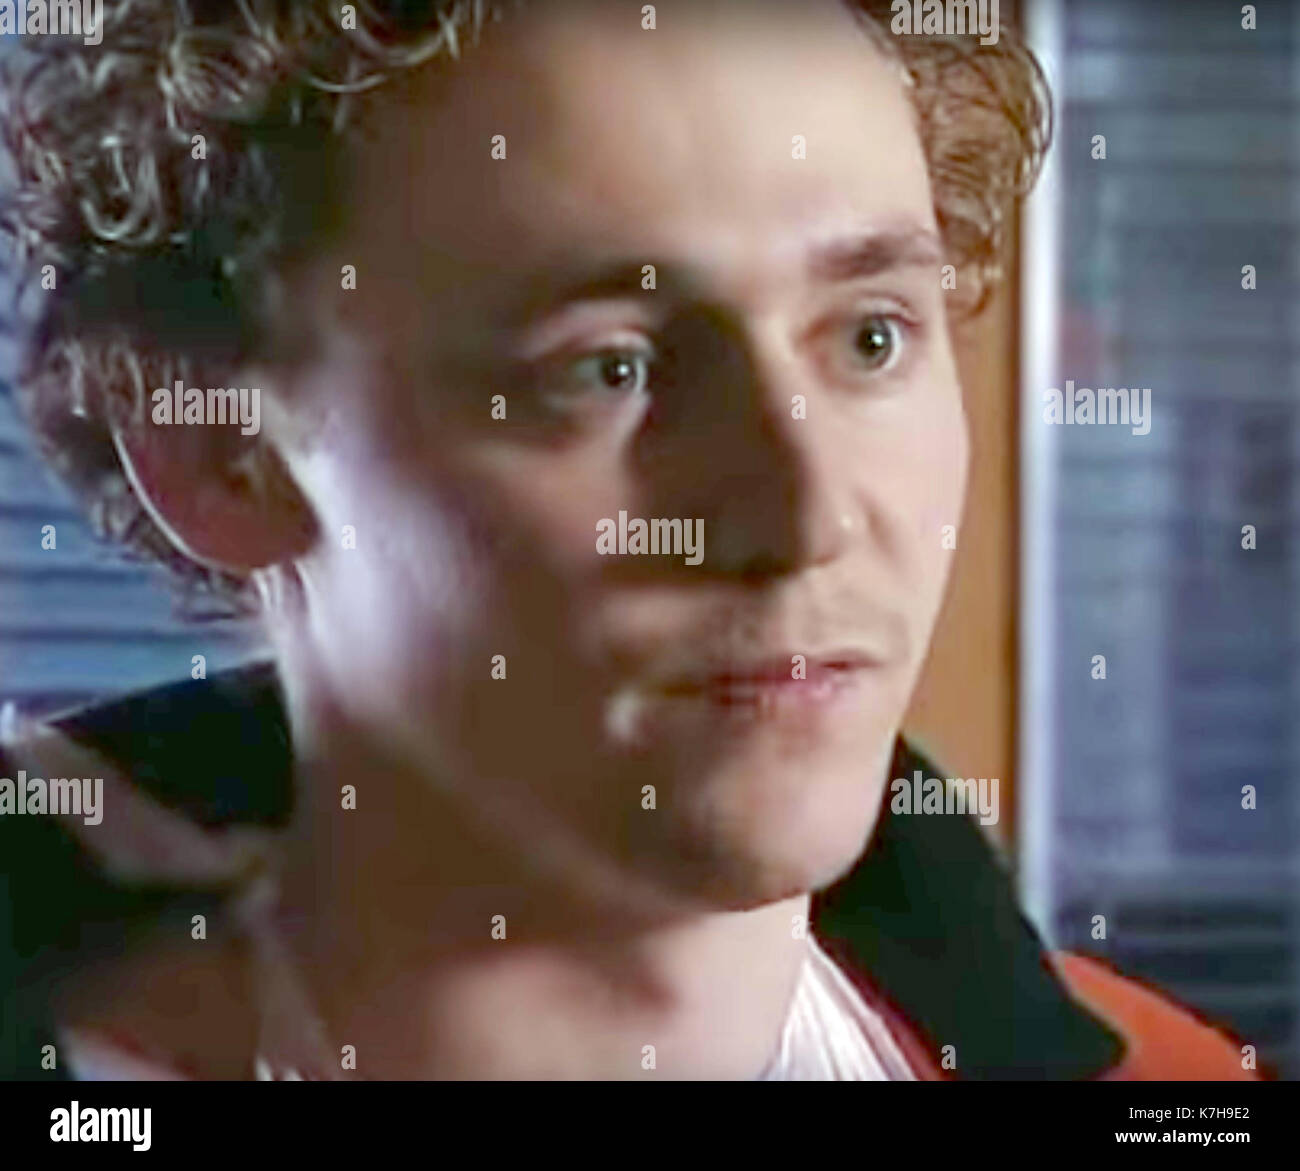 Photo Must Be Credited ©Alpha Press 065630 (2007) Tom Hiddleston as Chris Vaughan in episode The Killing Floor  of Casualty TV Series. Stock Photo